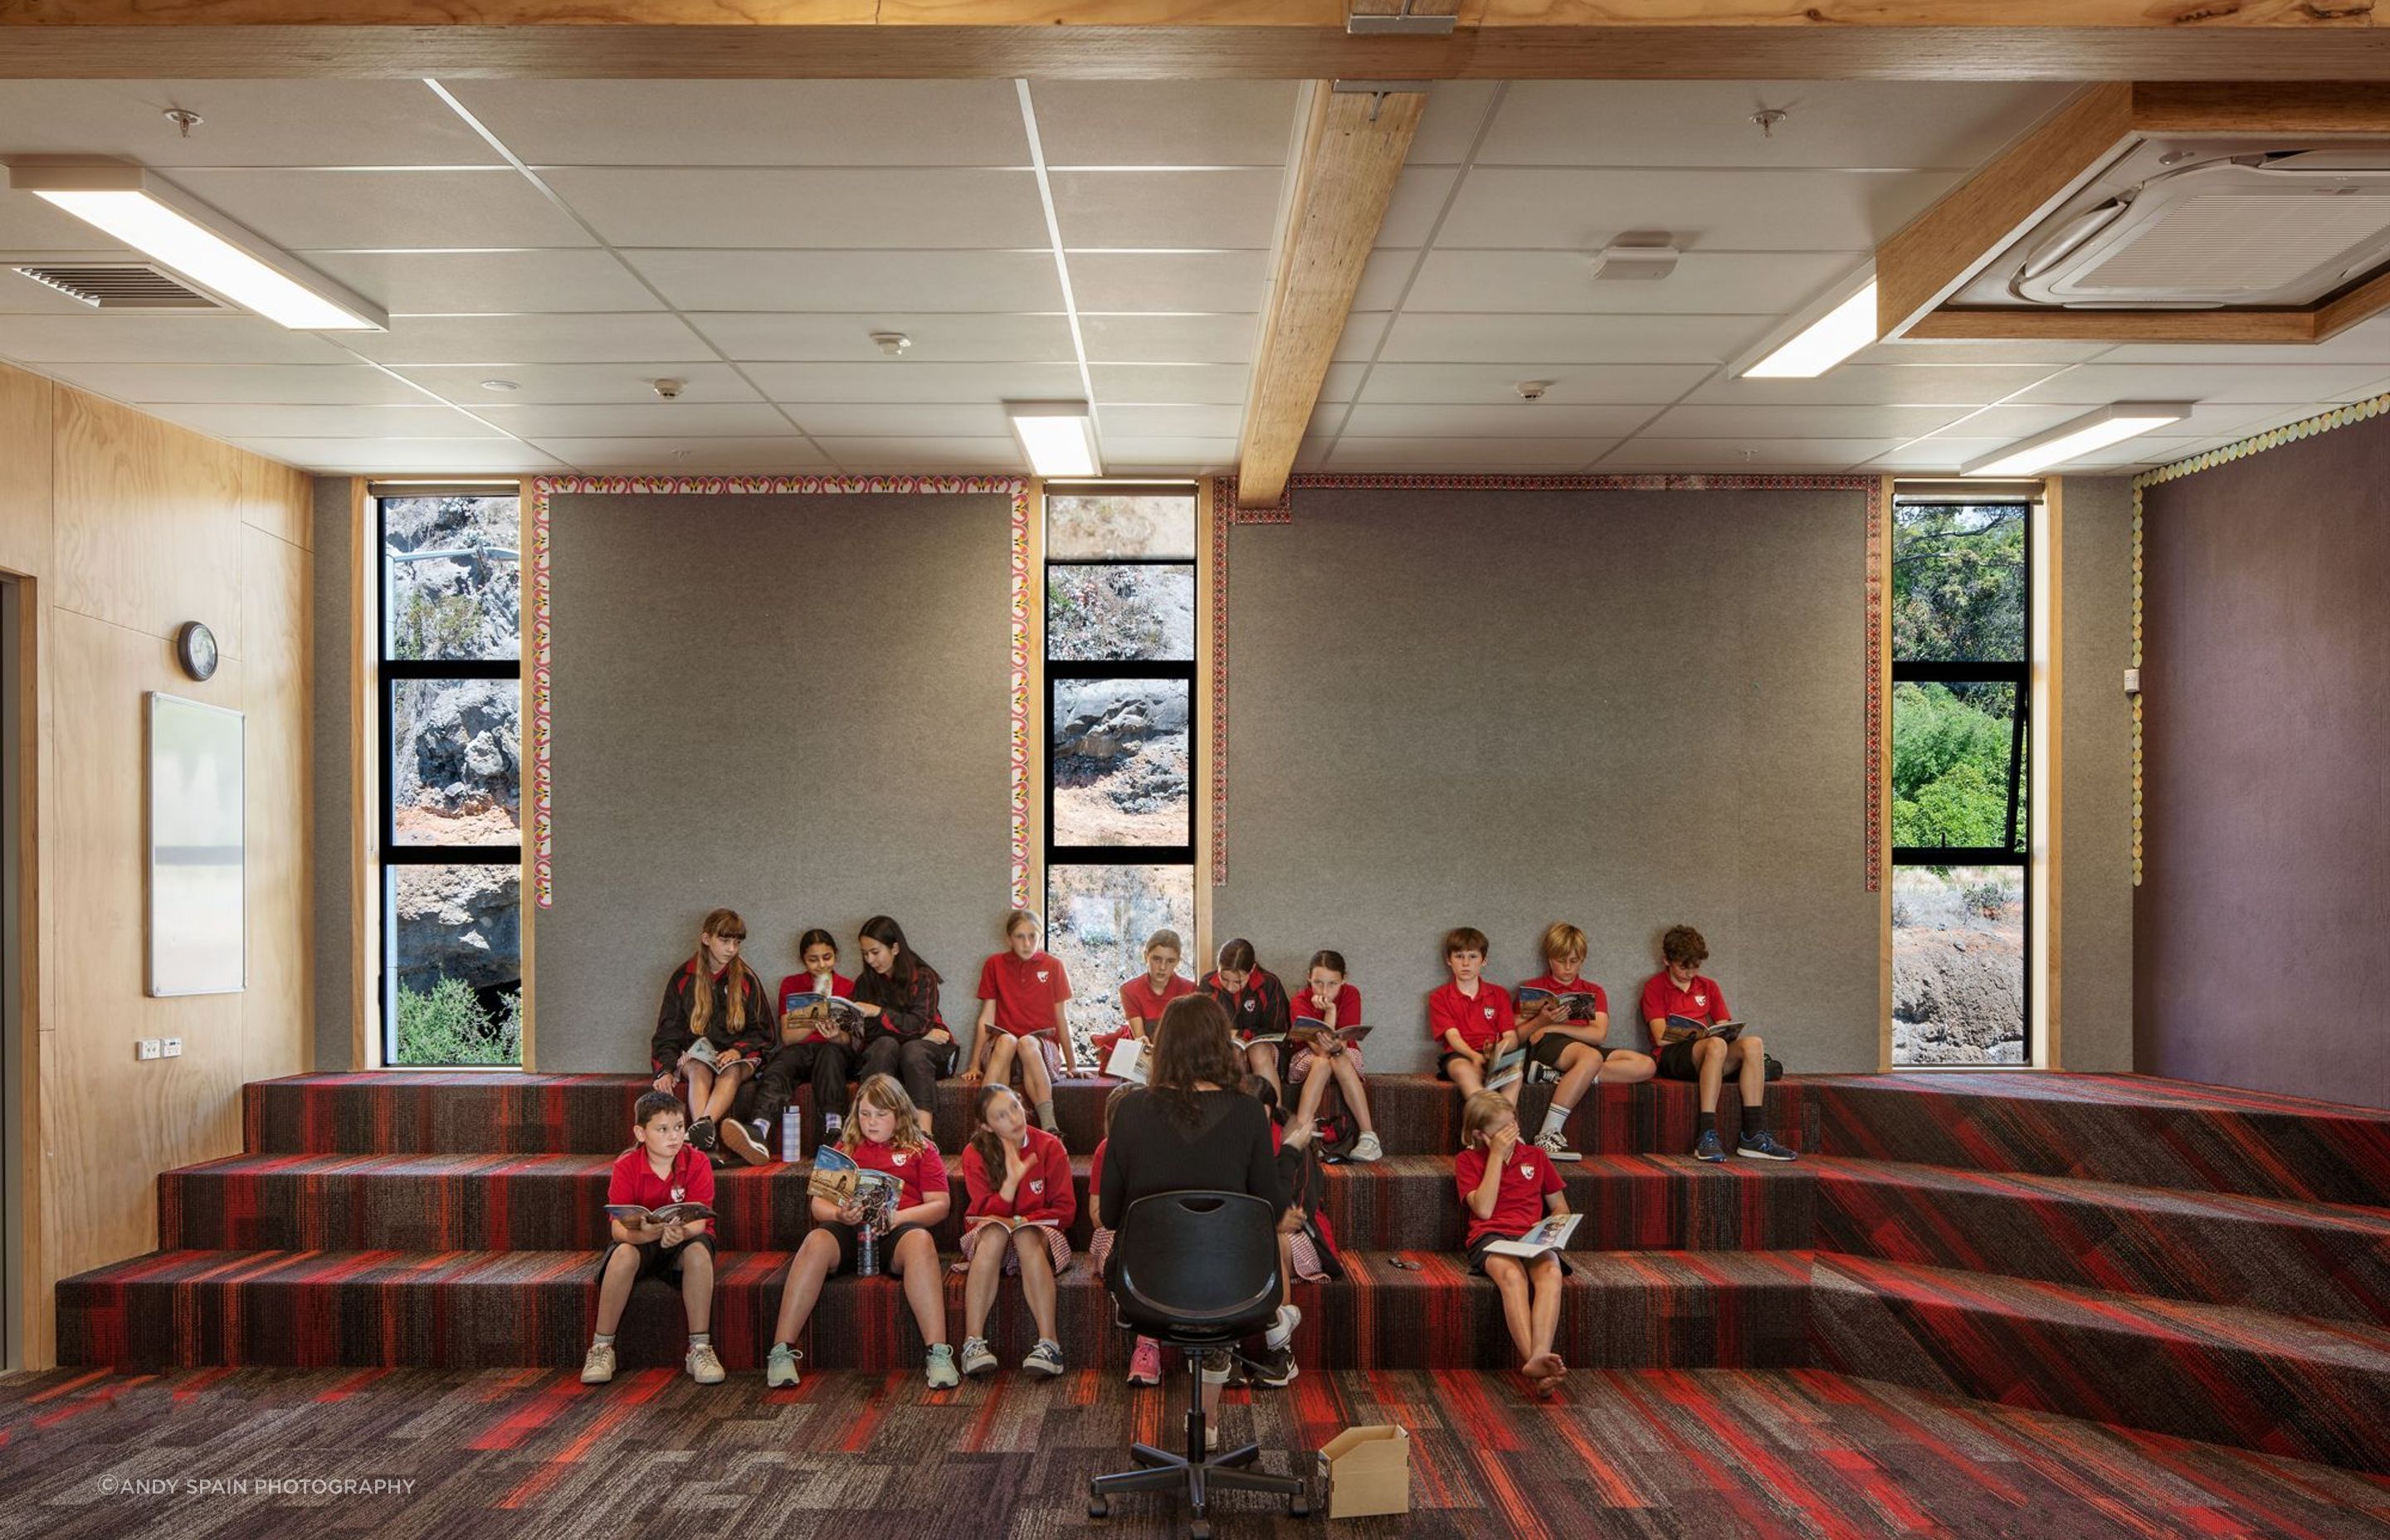 The school board had several functional requirements for the school which included the provision of agile spaces that could accommodate a variety of learning arrangments.